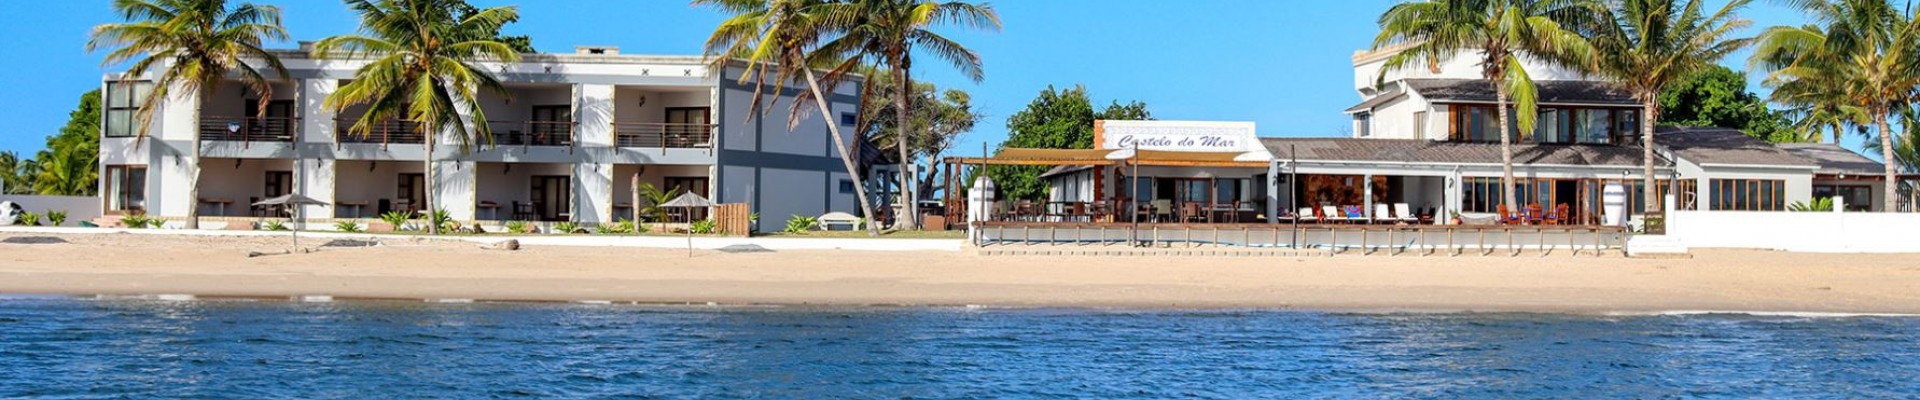 3* Castelo Do Mar - Mozambique Package (4 nights)